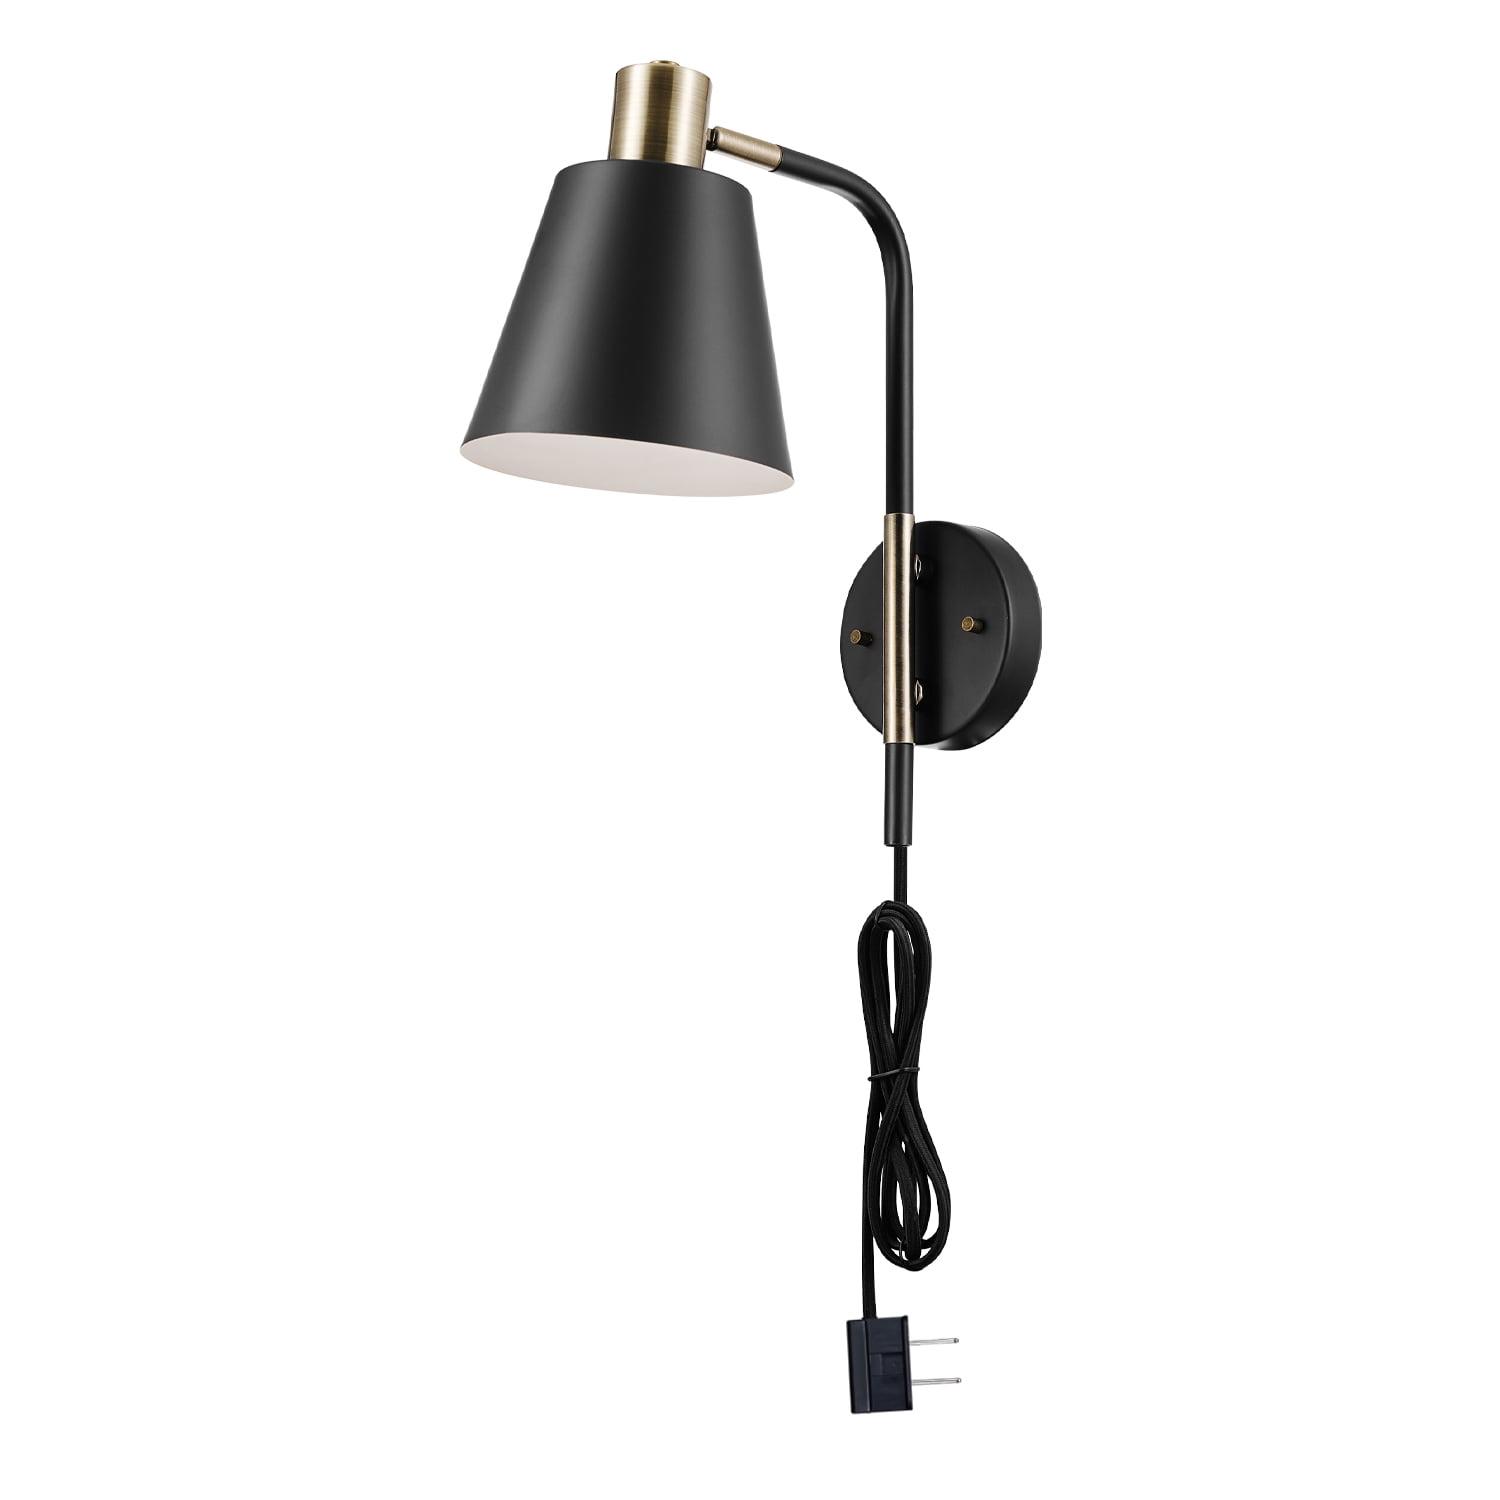 Cleo Matte Black and Antique Brass Plug-In or Hardwire Wall Sconce